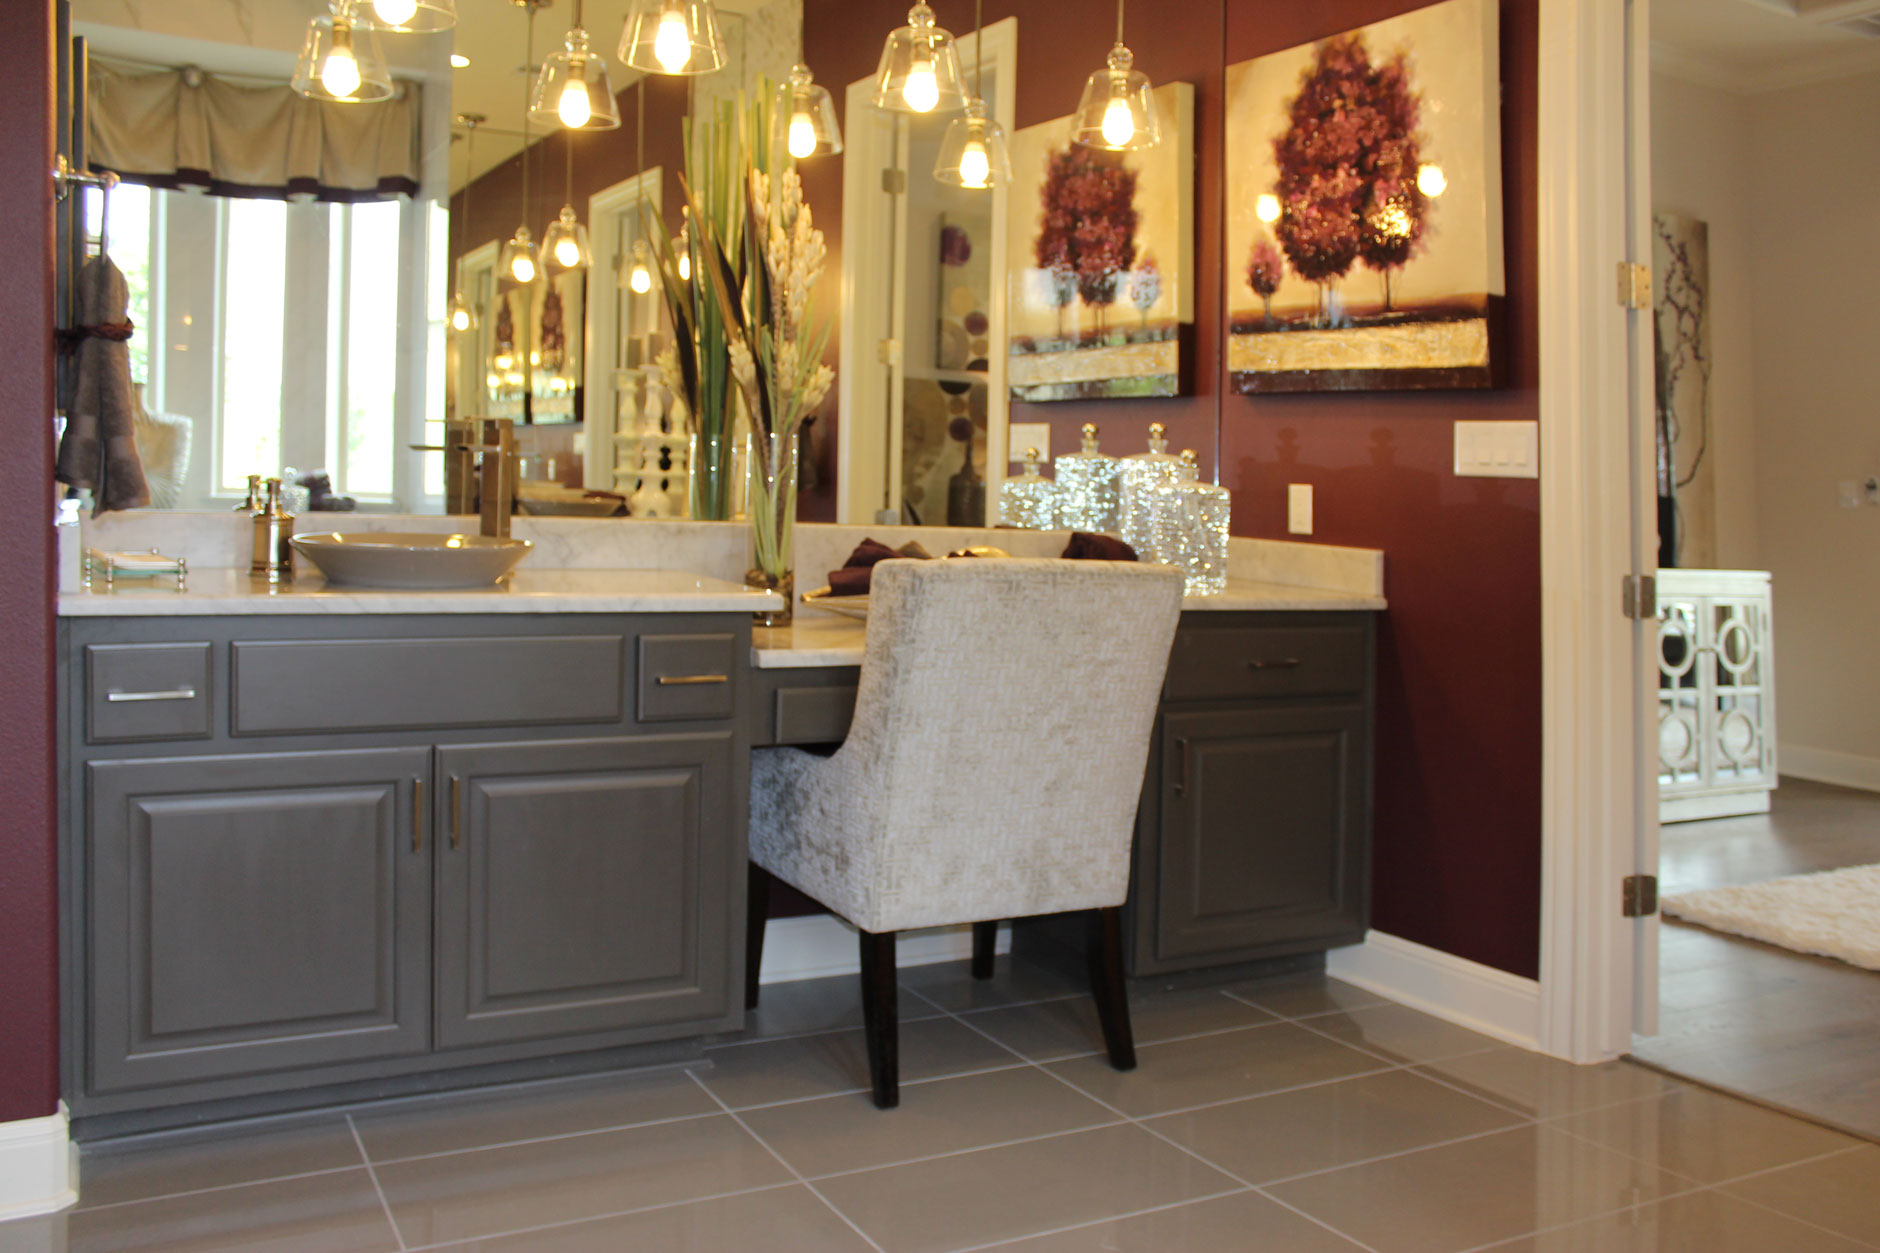 Primary bath cabinets in Umber with knee space by Burrows Cabinets